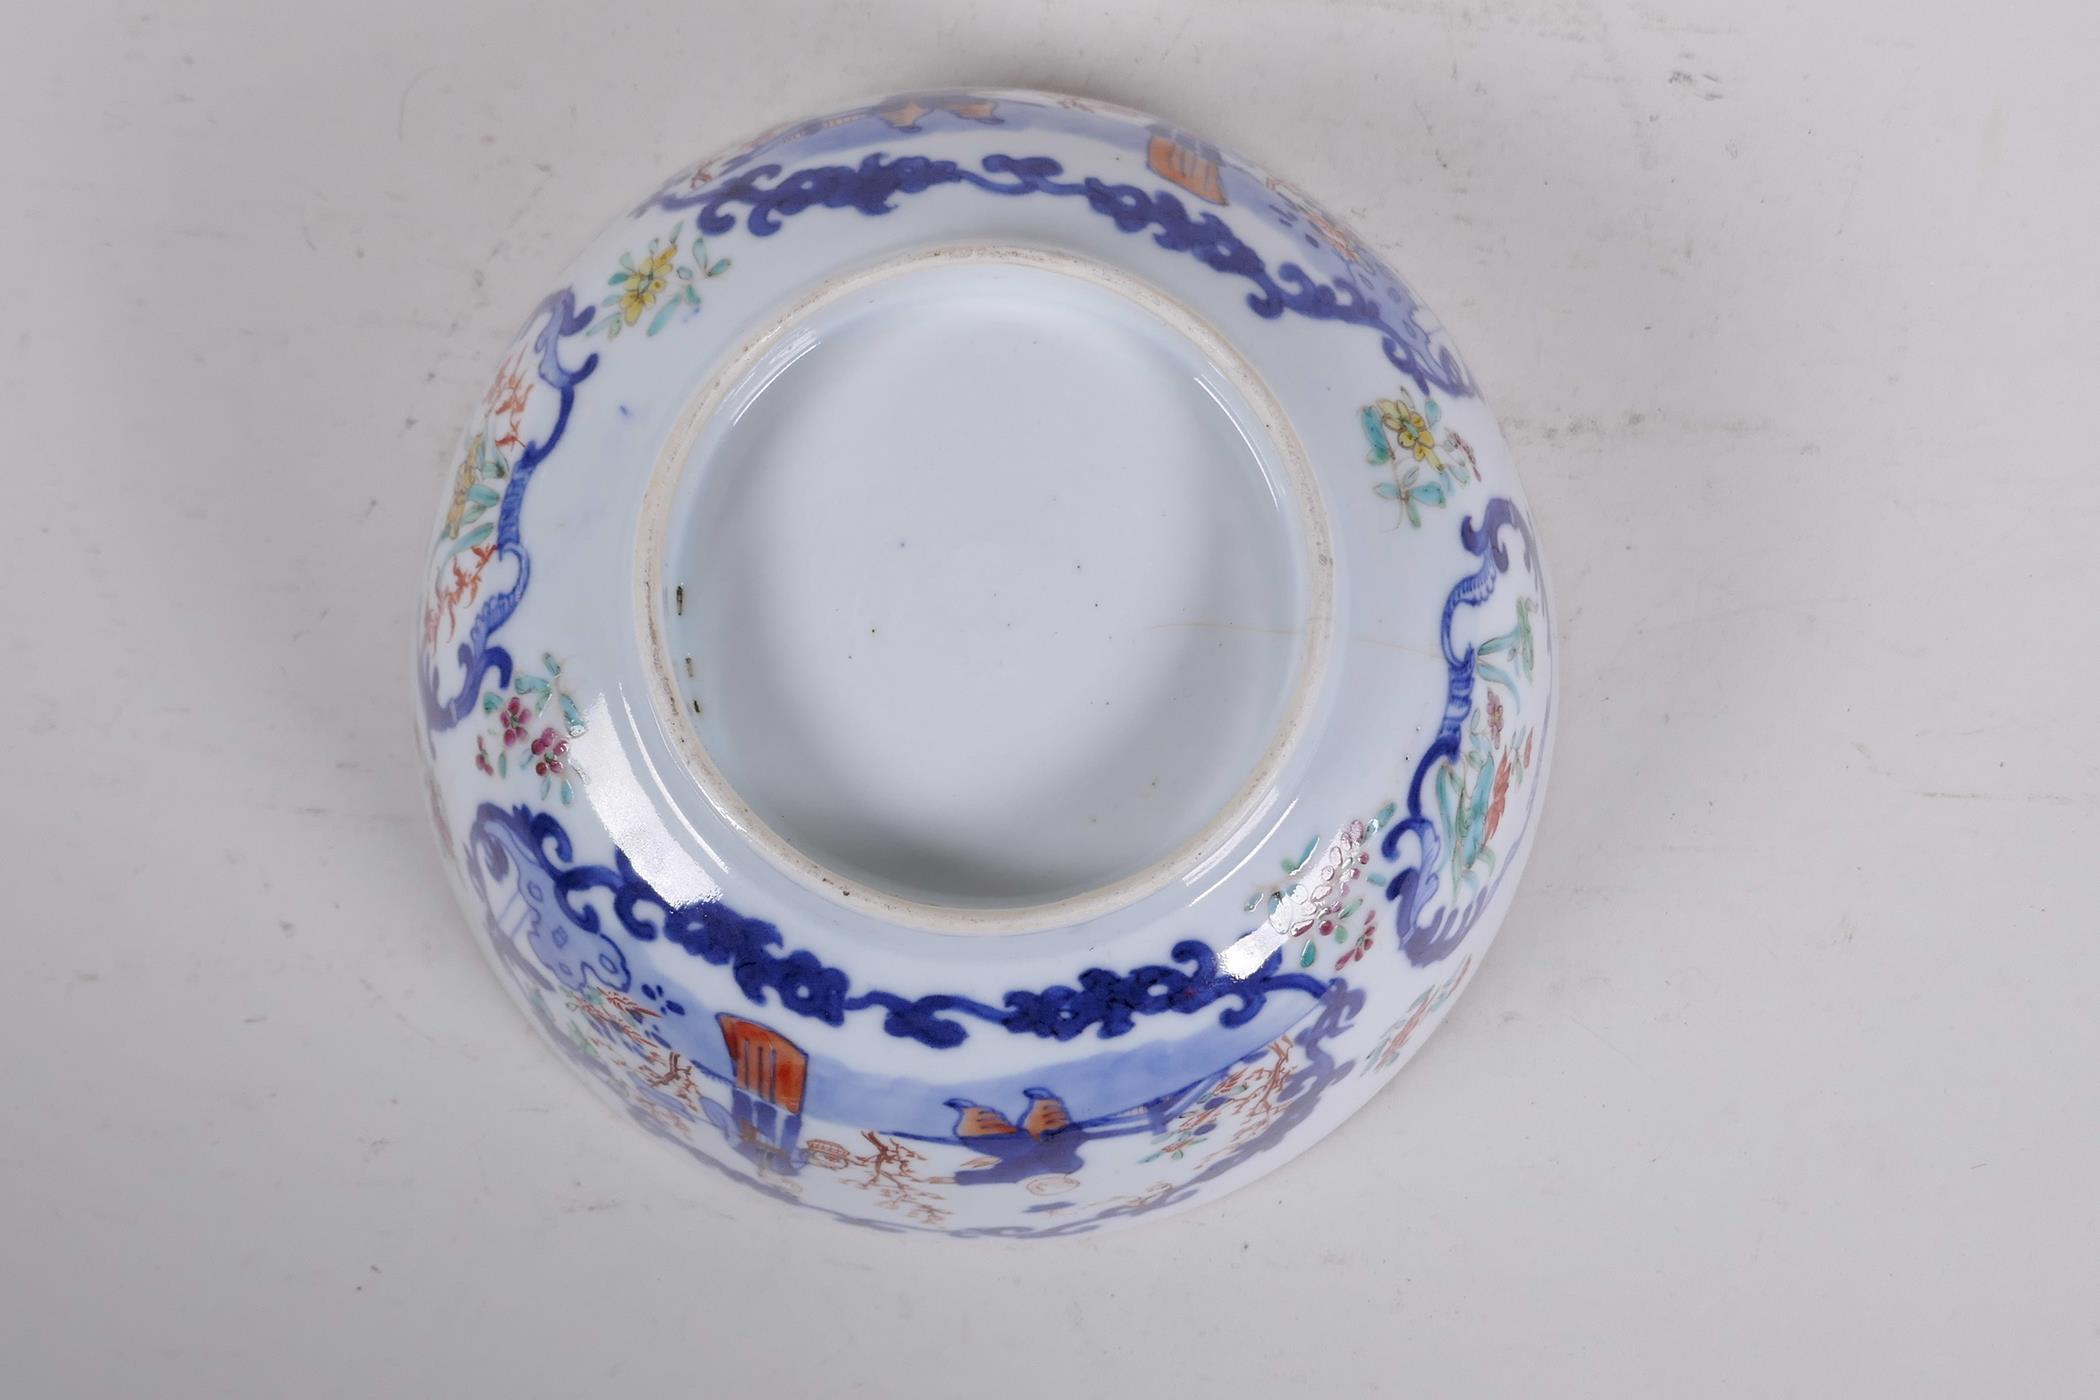 A C18th Chinese polychrome porcelain bowl decorated with figures in a landscape and flowers, 7½" - Image 6 of 8